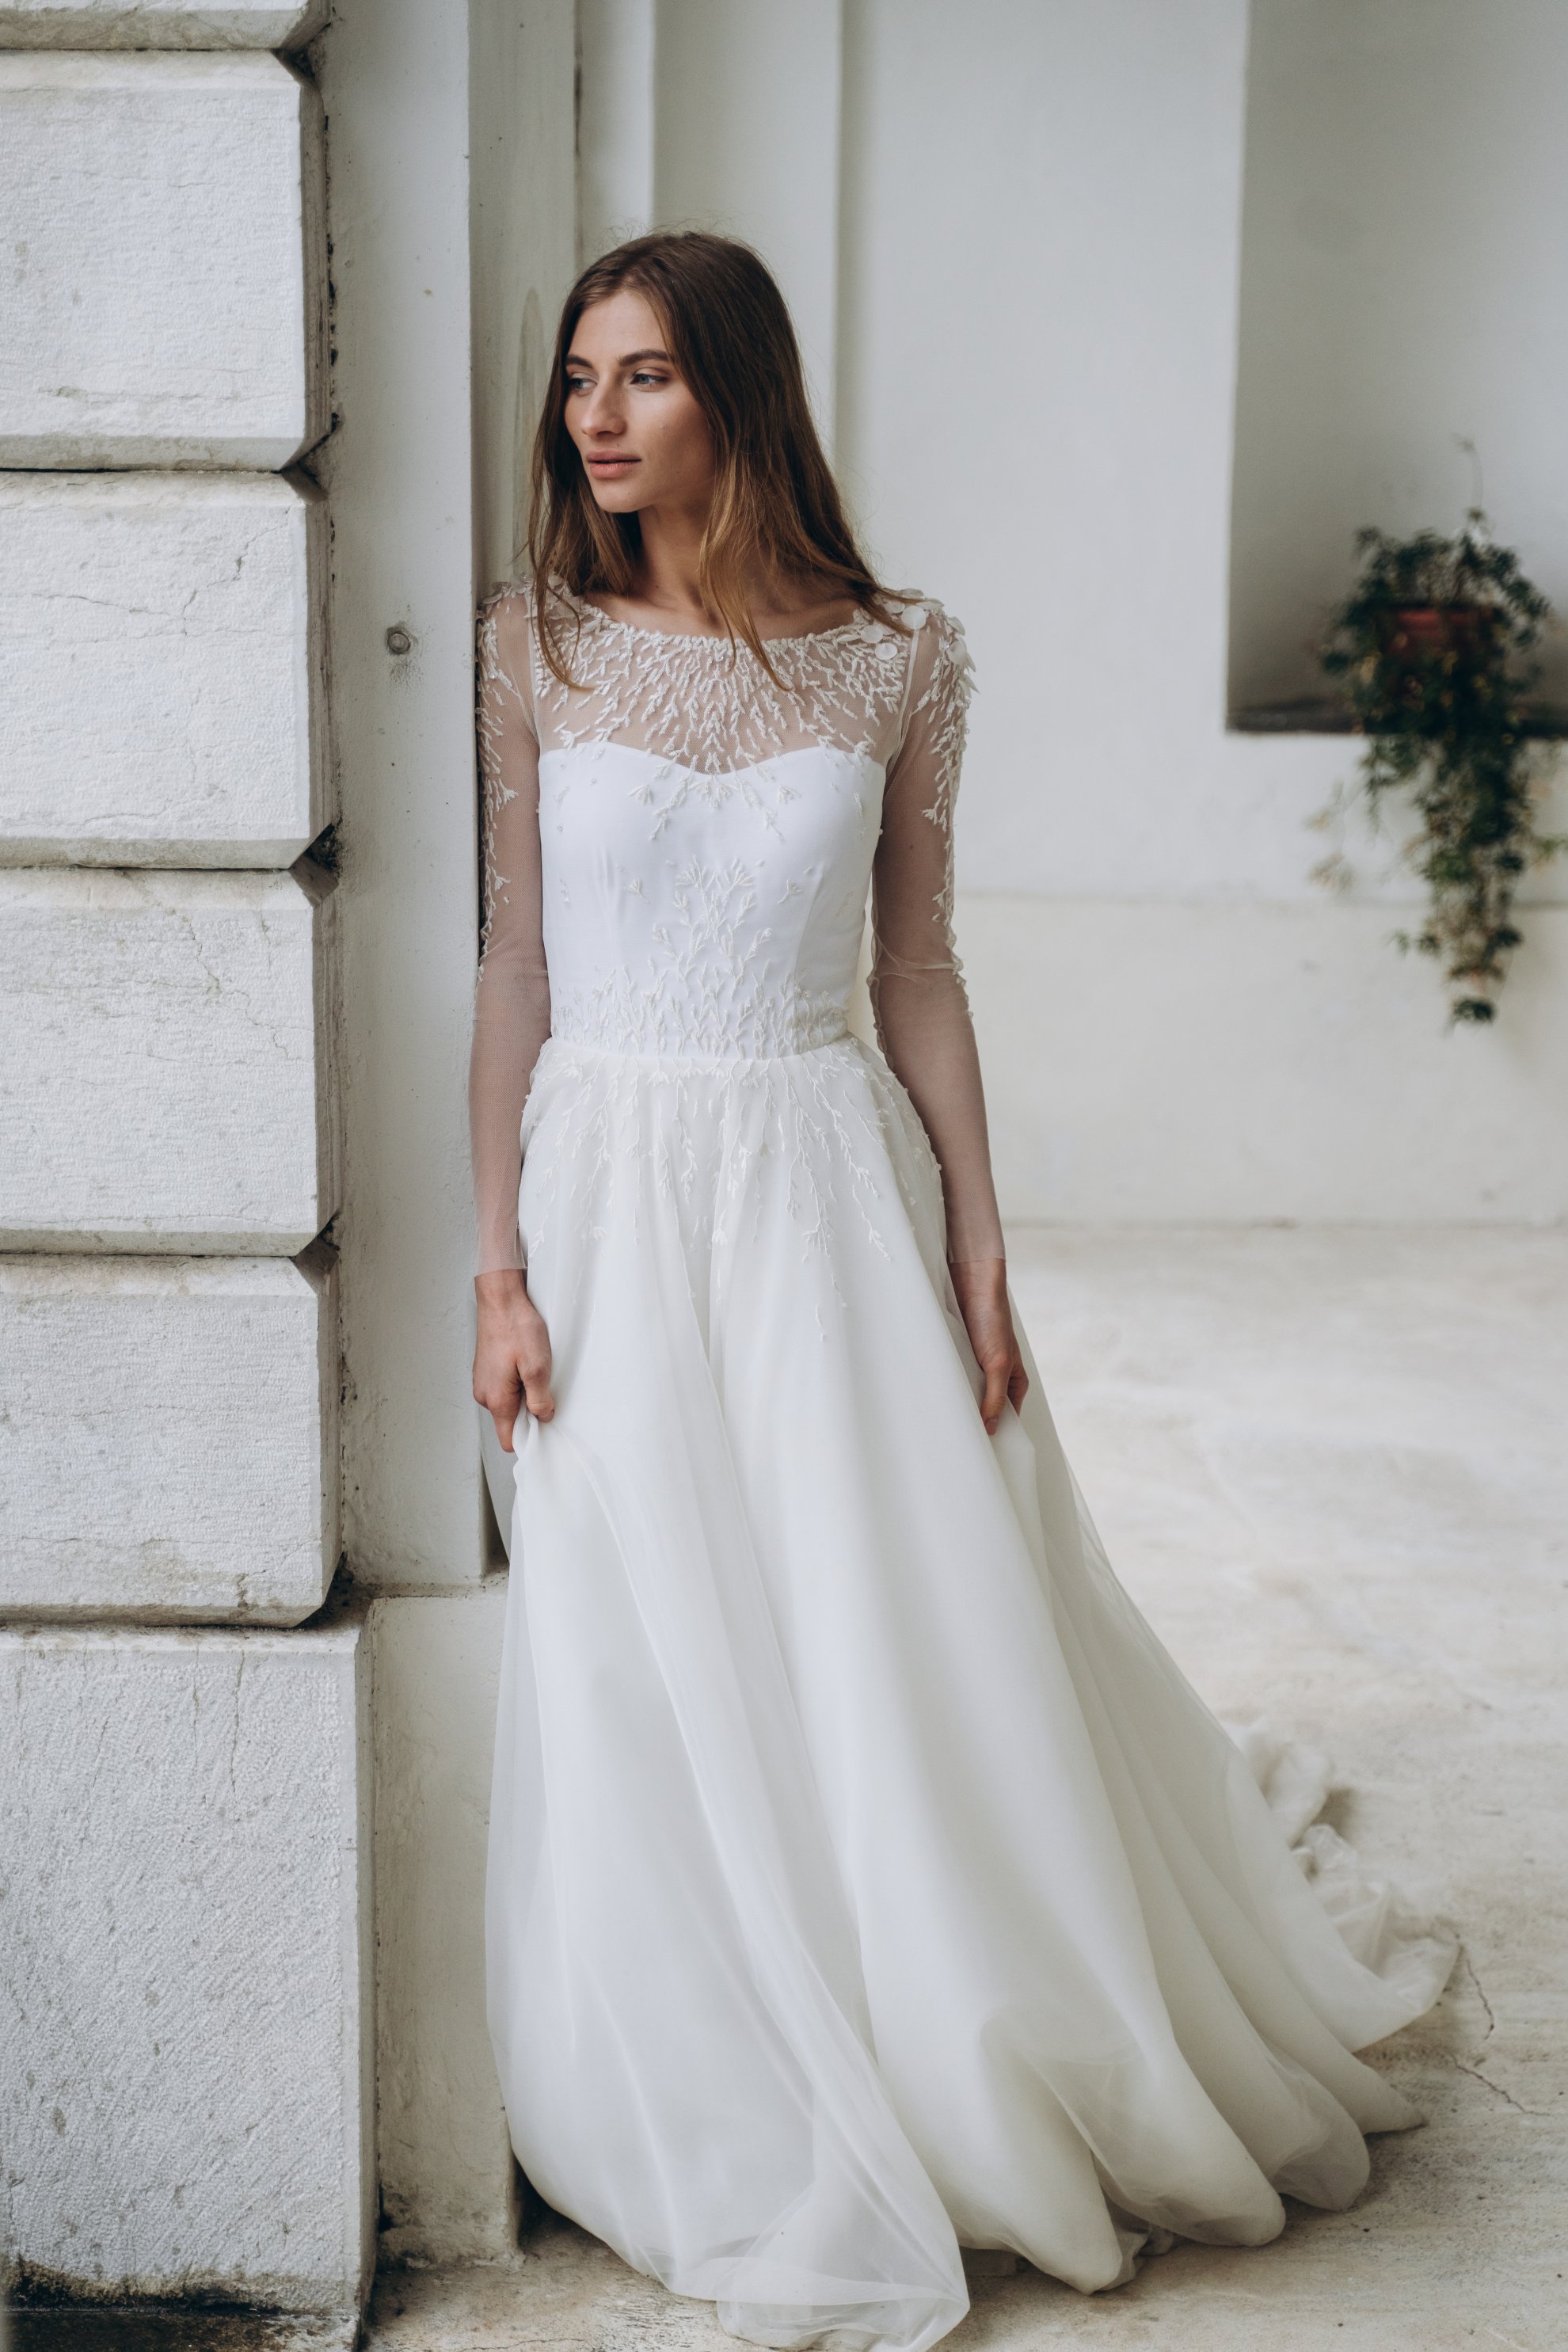 Offwhite wedding dress with sheer long sleeve embroidered